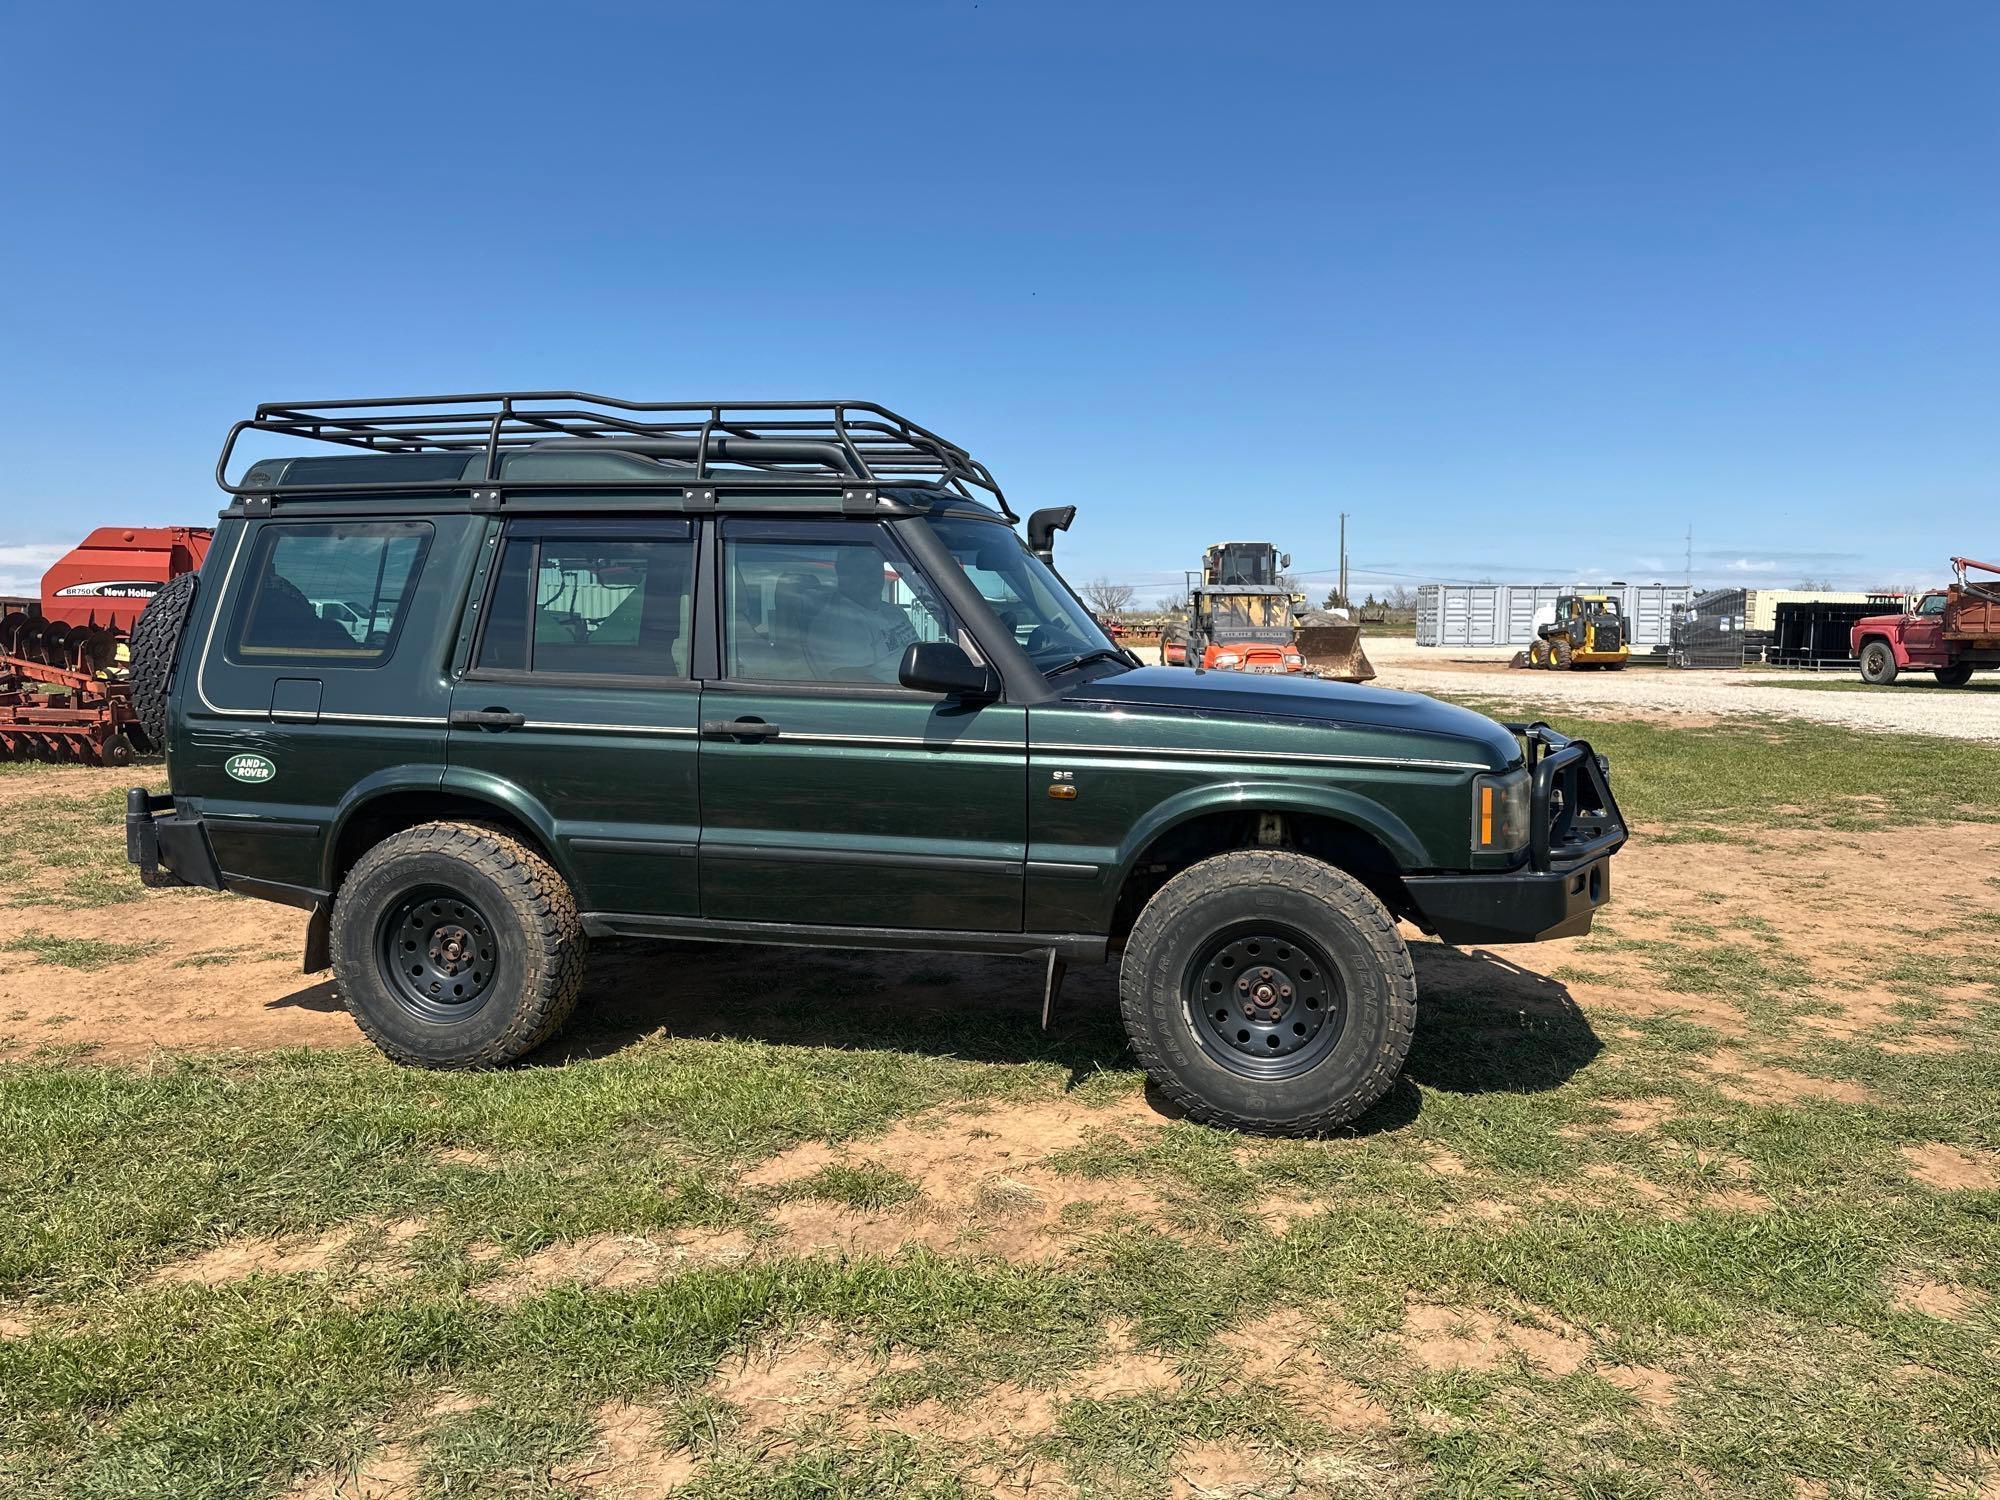 2004 Land Rover Discovery Multipurpose Vehicle (MPV)